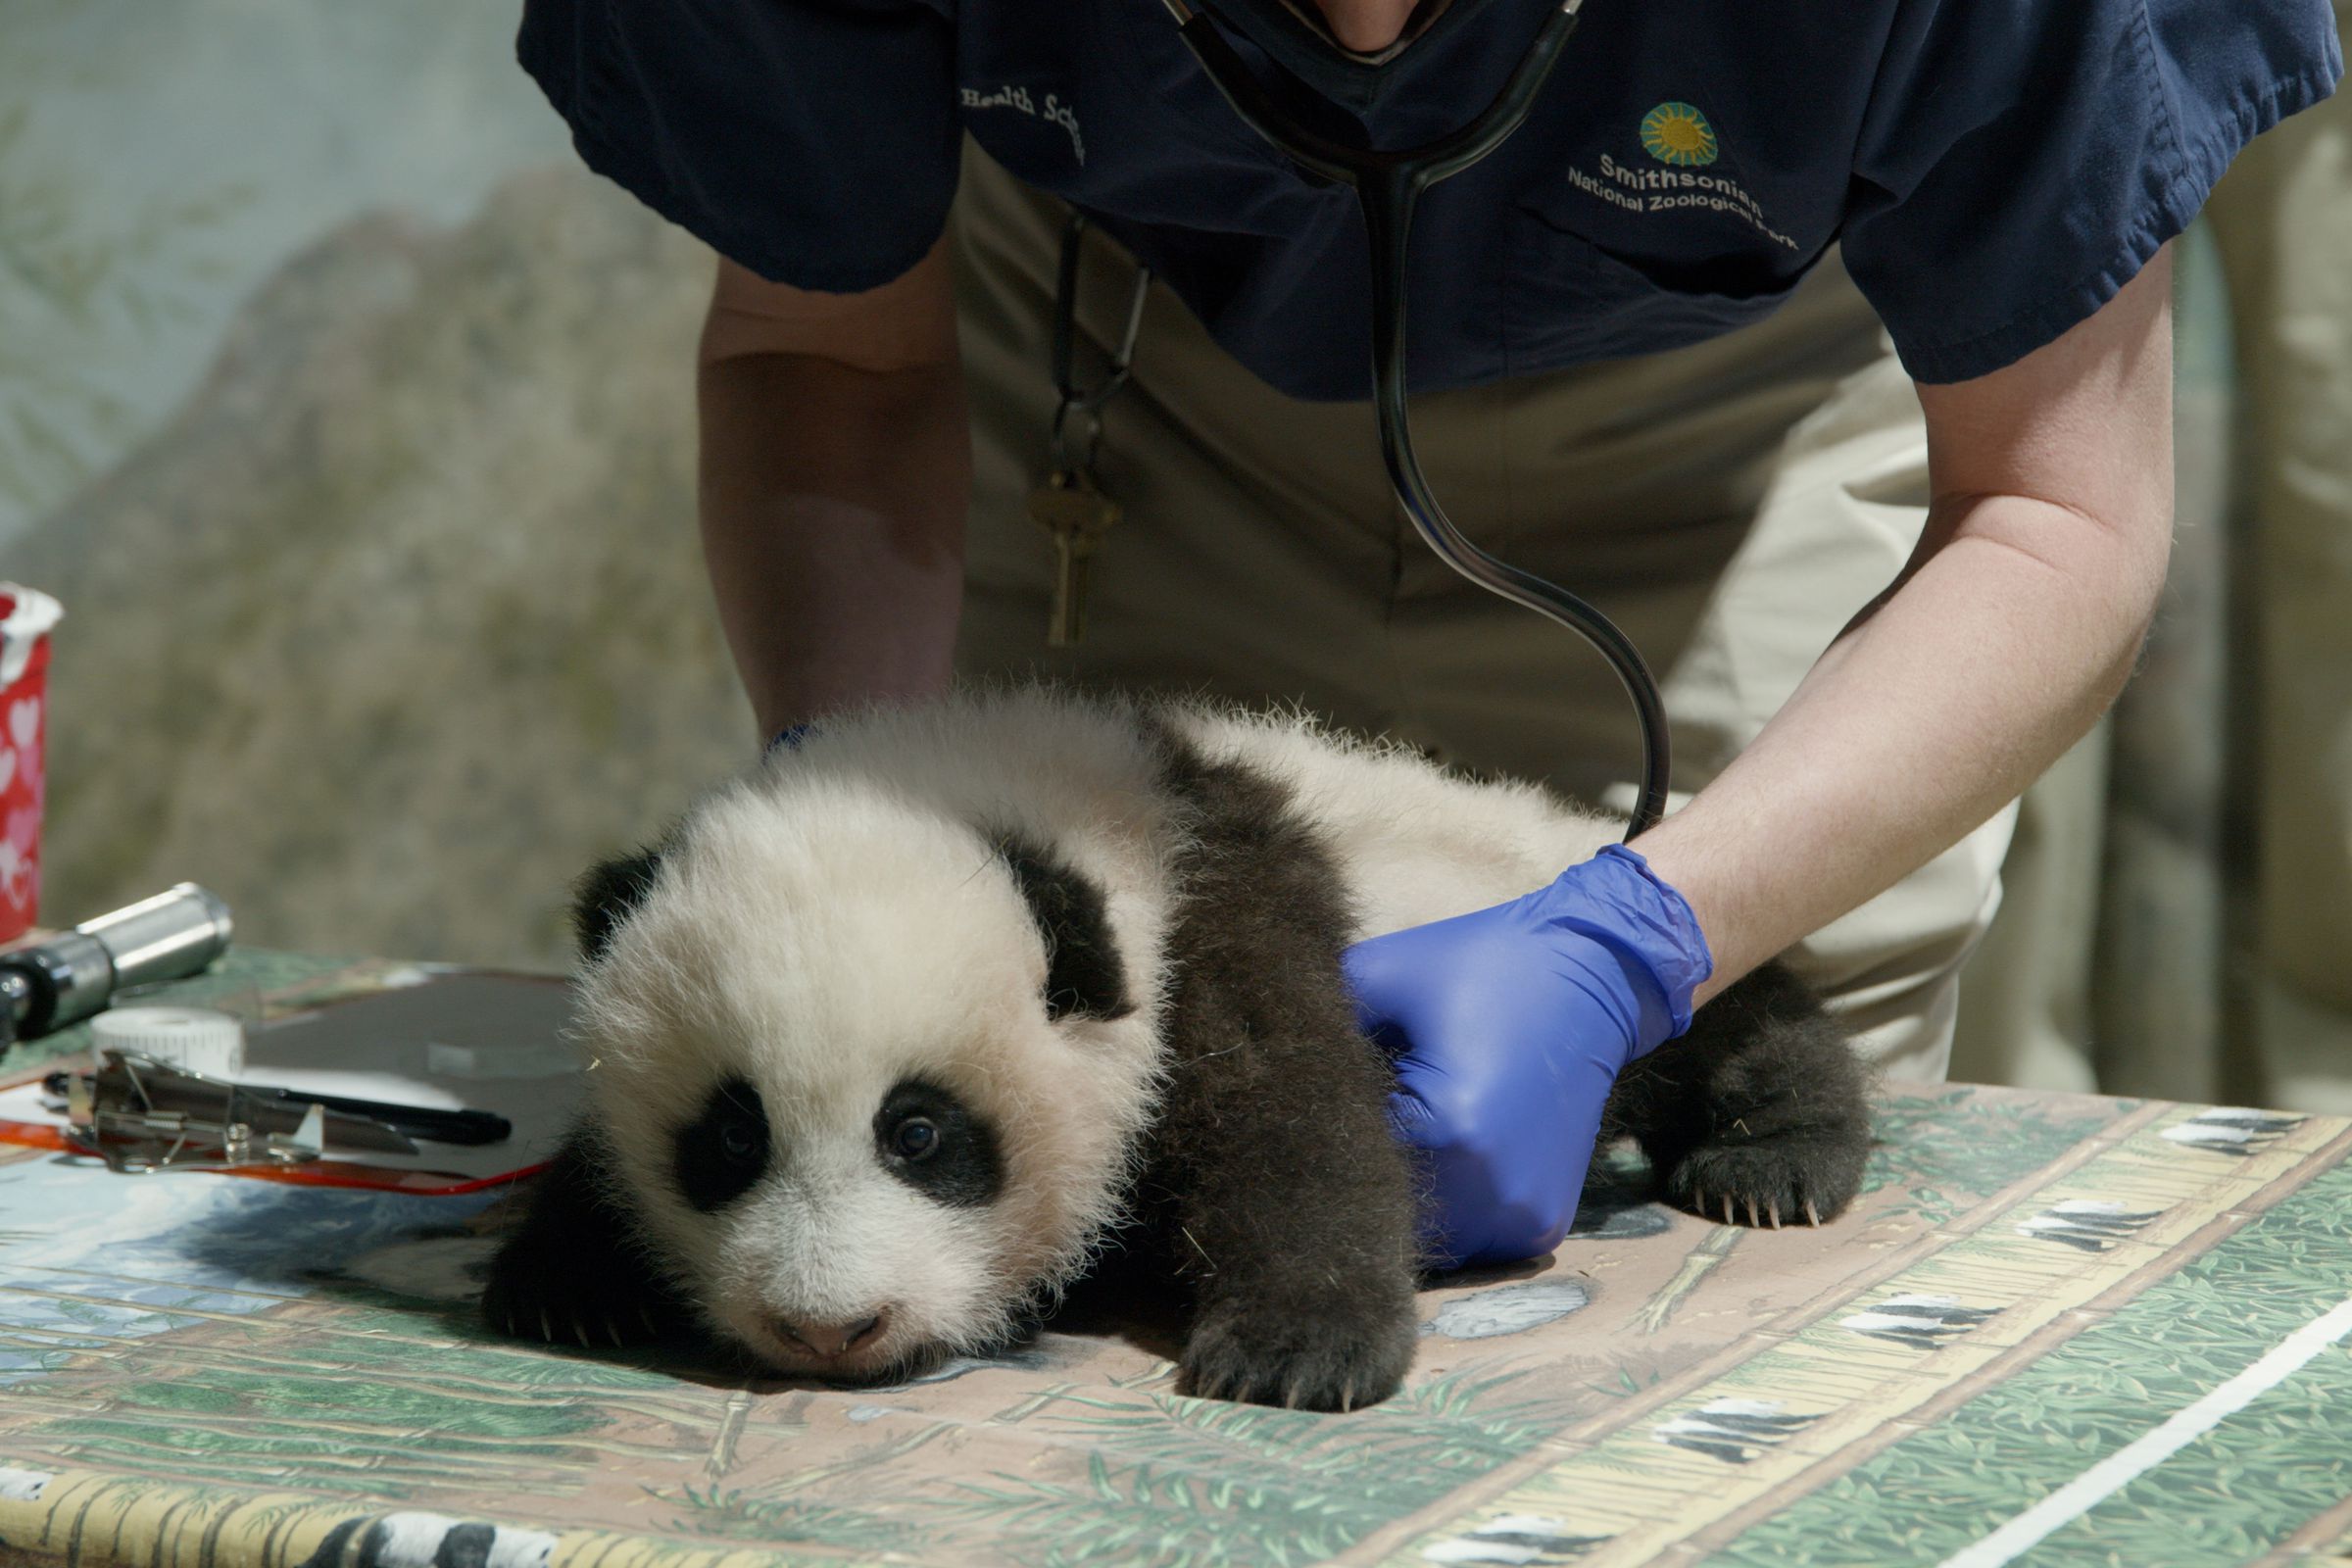 Nov. 18, 2020: The Smithsonian’s National Zoo’s giant panda cub received a clean bill of health from Zoo veterinarians during his third veterinary exam. They listened to his heart and lungs, checked his eyes and mouth, and tested the range of motion in his limbs. The cub also received his second canine distemper vaccine.  